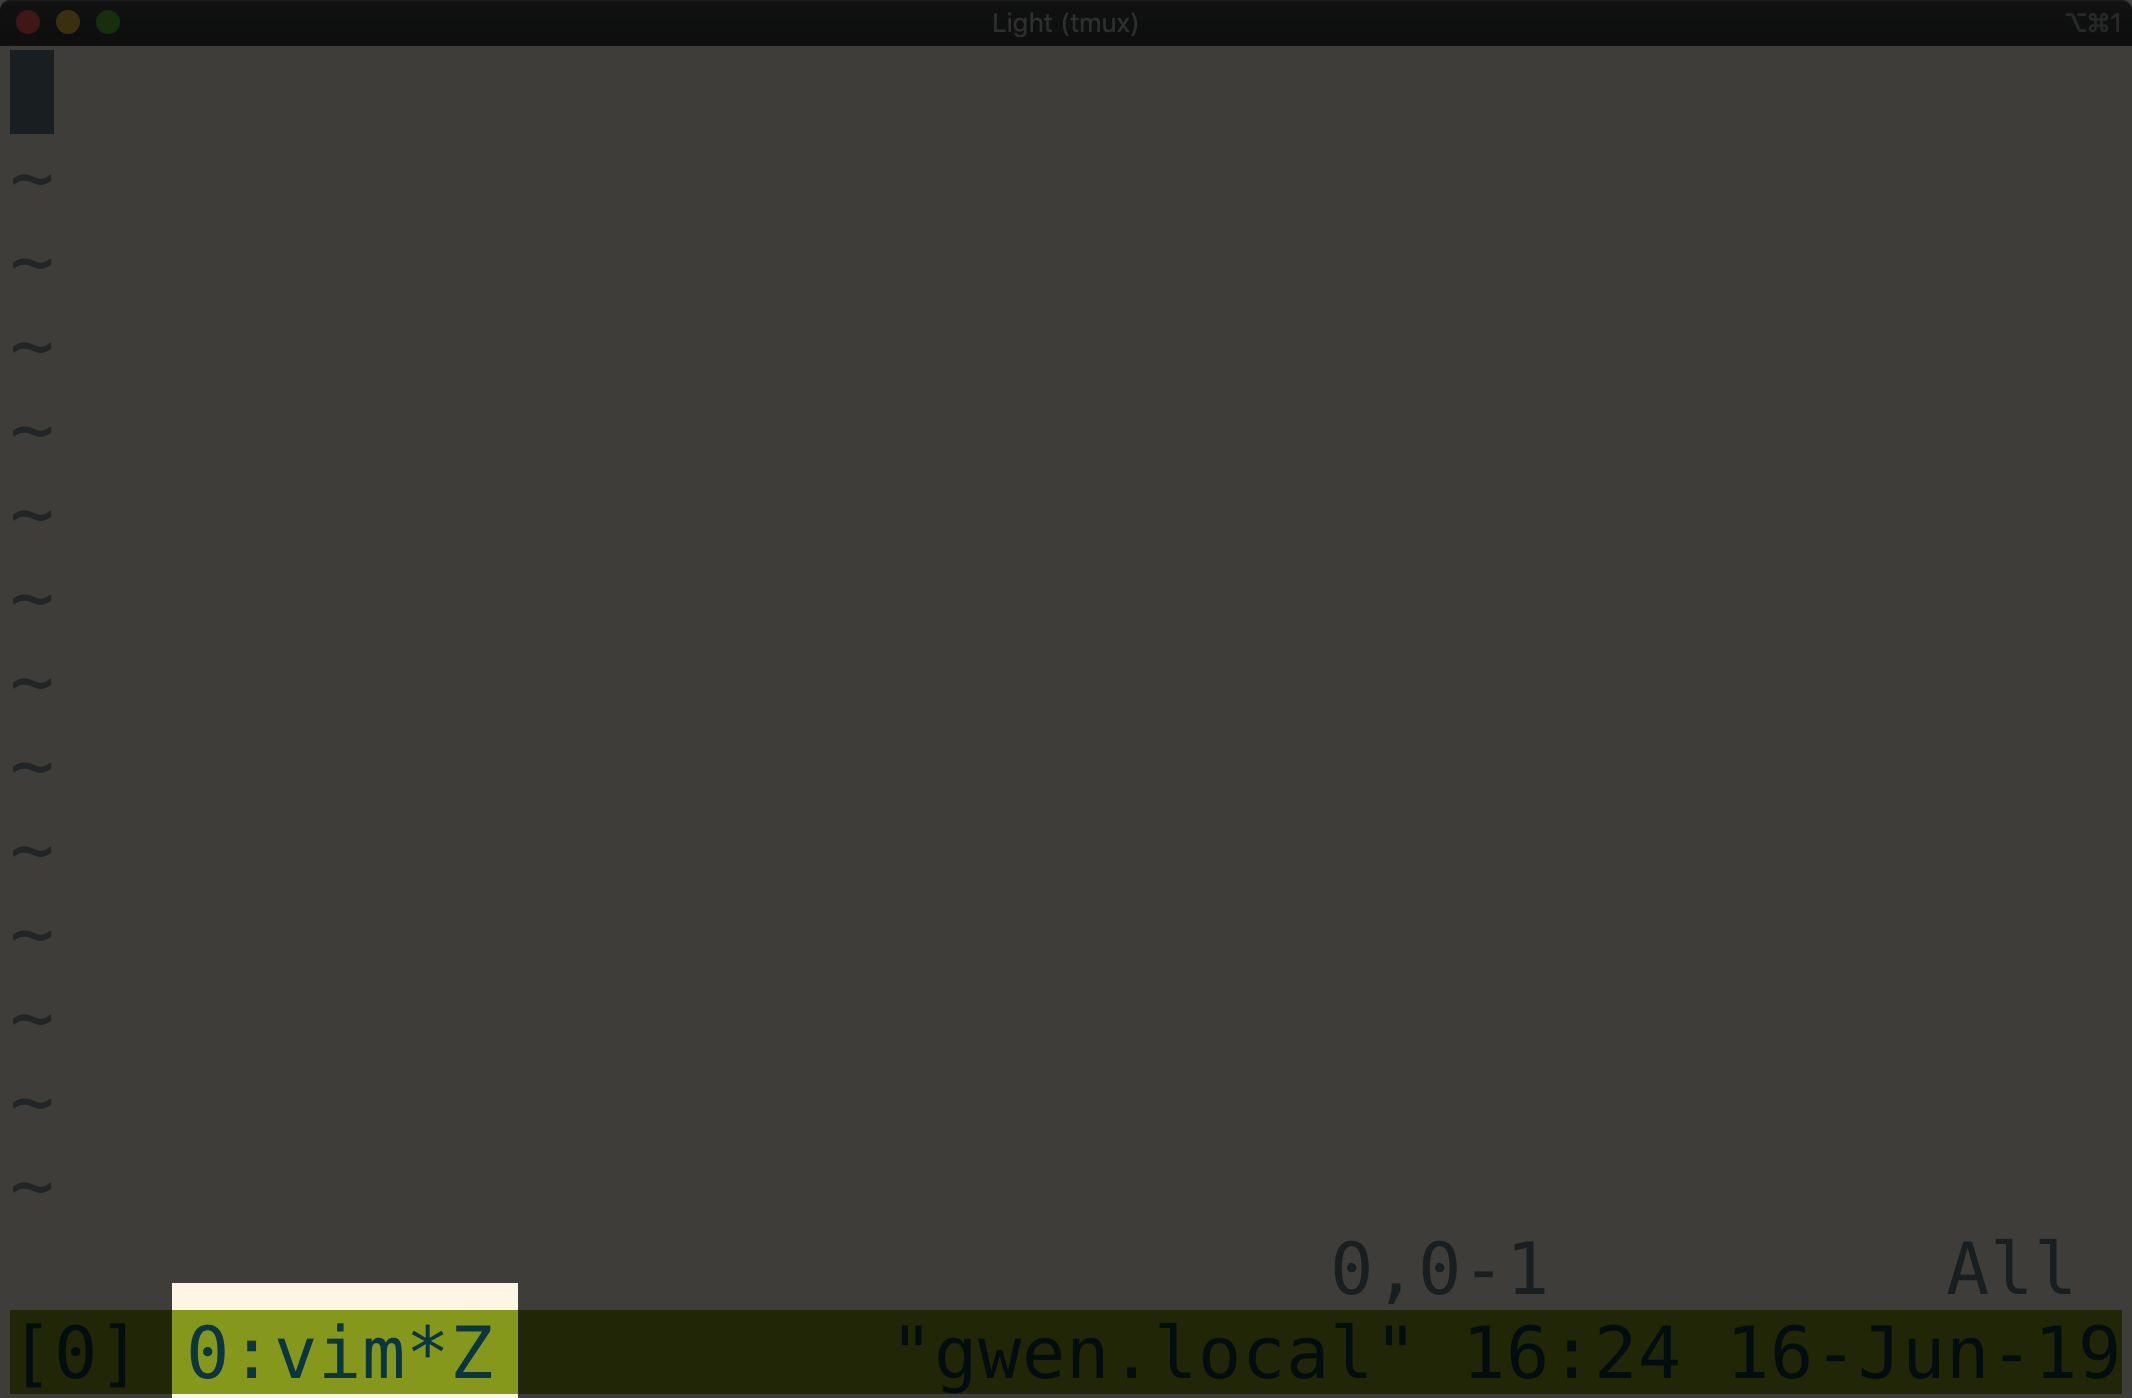 Tmux window with editor pane zoomed showing window in status bar
highlighted